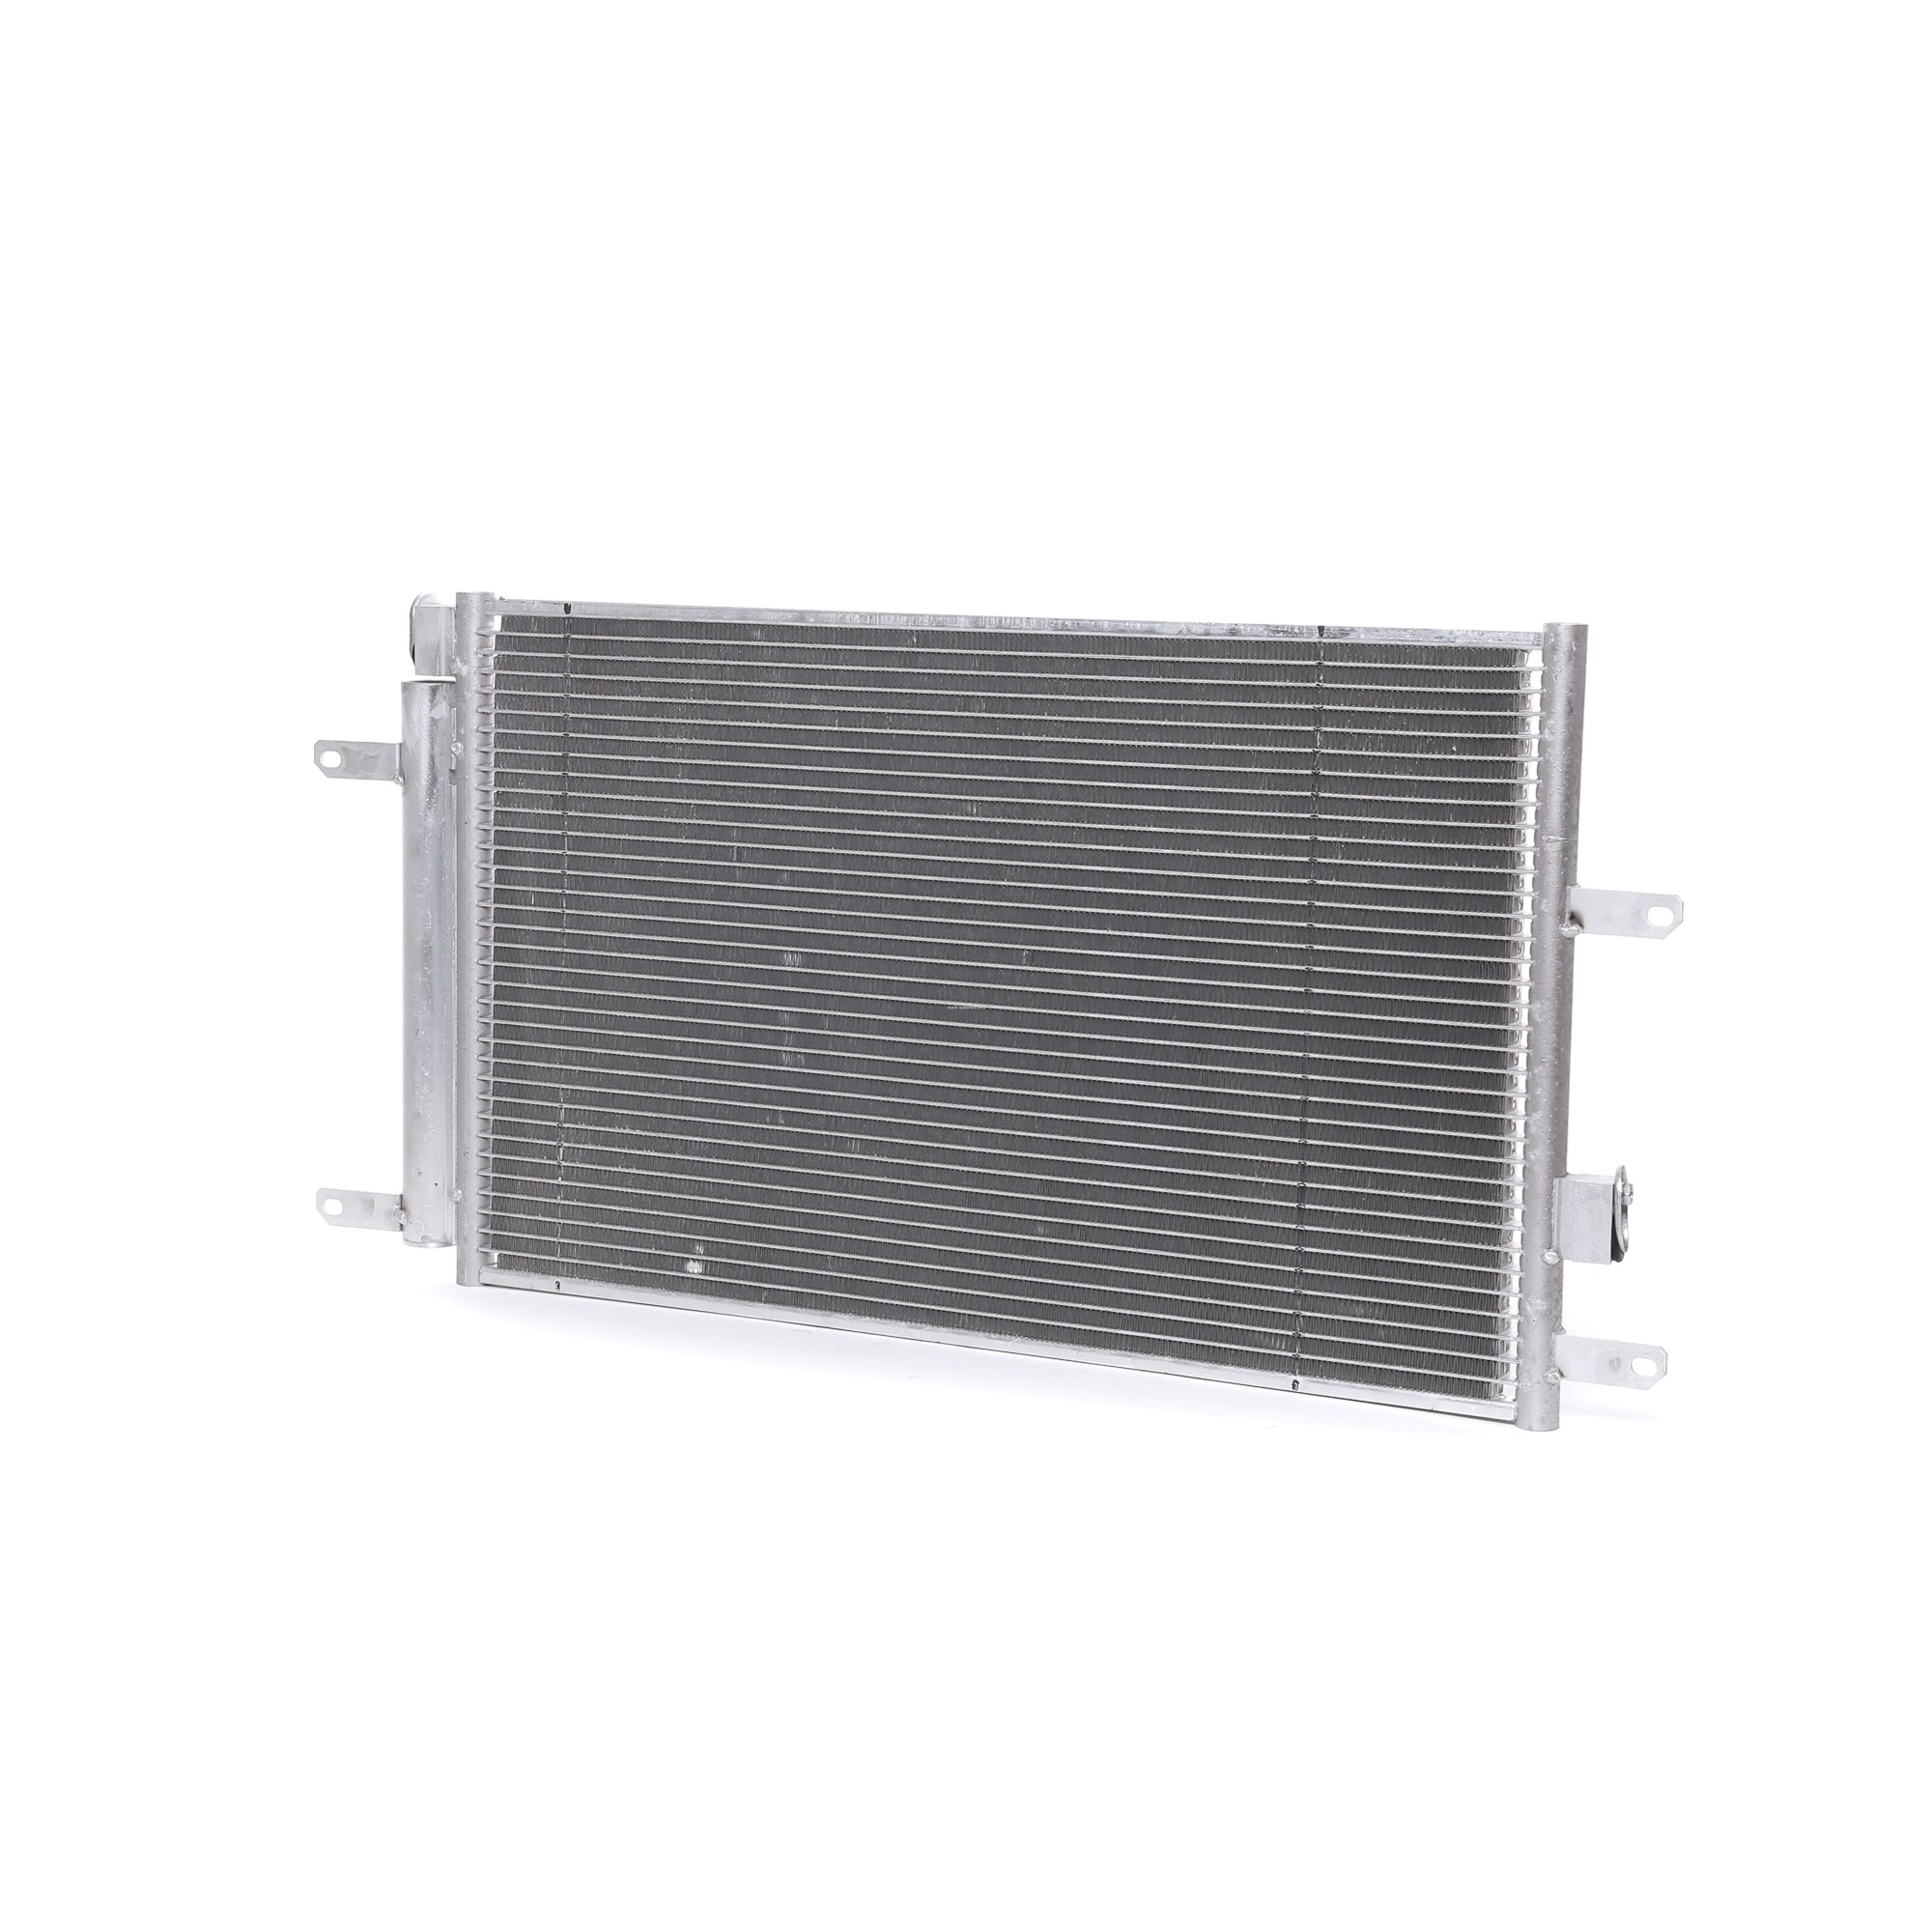 Iveco Air conditioning condenser STARK SKCD-0110461 at a good price